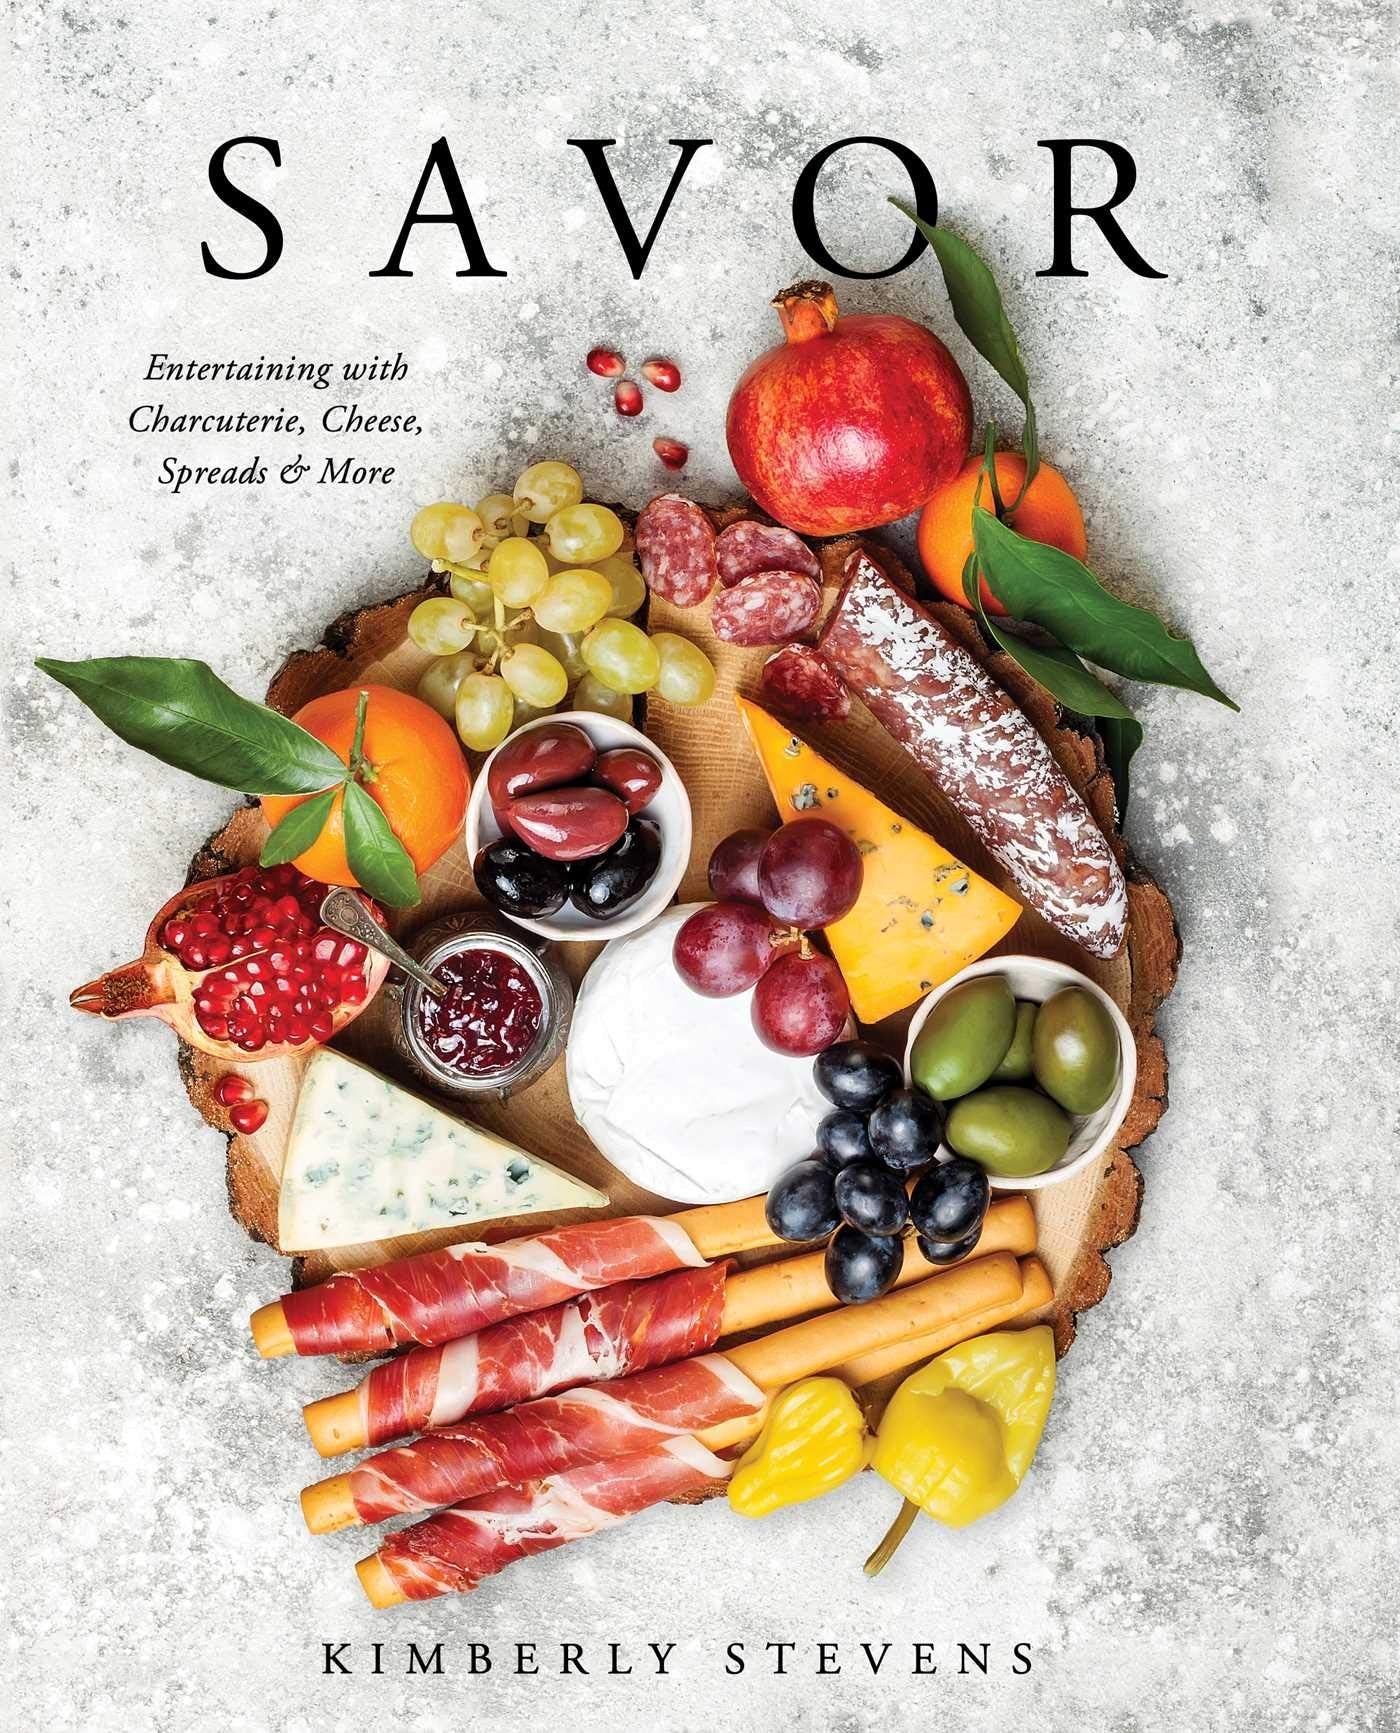 Savor - Entertaining with Charcuterie, Cheese, Spreads & More